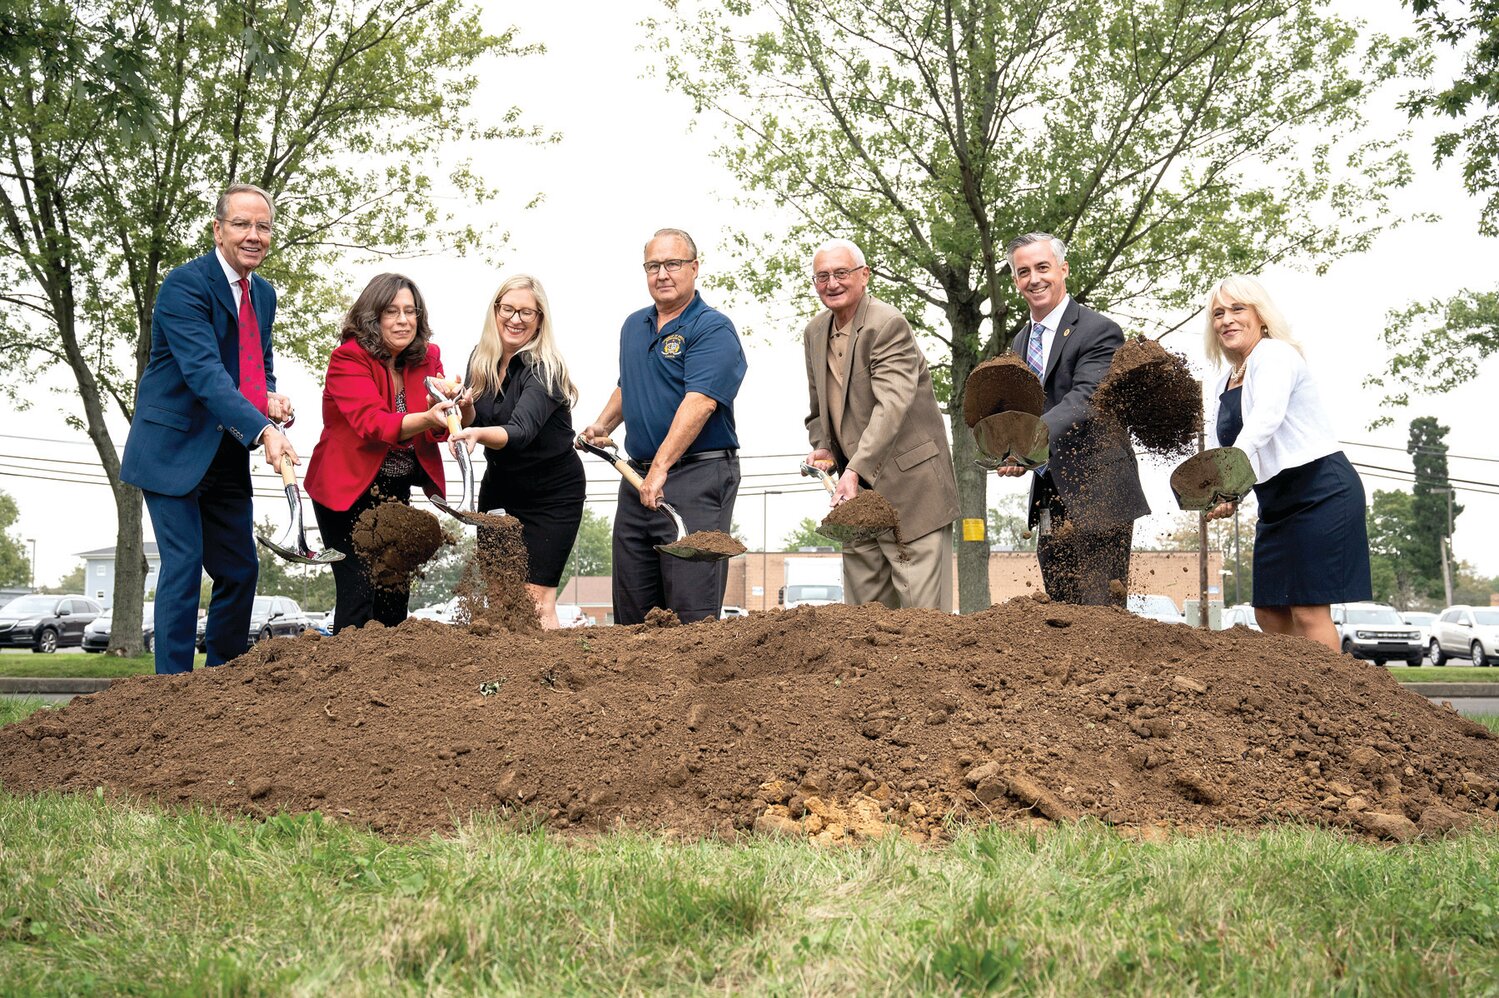 Officials in September broke ground in Bristol Township at the future site of the new Lower Bucks Government Services Center. From left are: David McHenry, of Erdy McHenry Architecture; Bucks County Chief Operating Officer Margie McKevitt; Bucks County Chief Clerk and Deputy COO Gail Humphrey; Bristol Township Council President Craig Bowen; and Bucks County Commissioners Gene DiGirolamo, Bob Harvie and Diane Ellis-Marseglia.